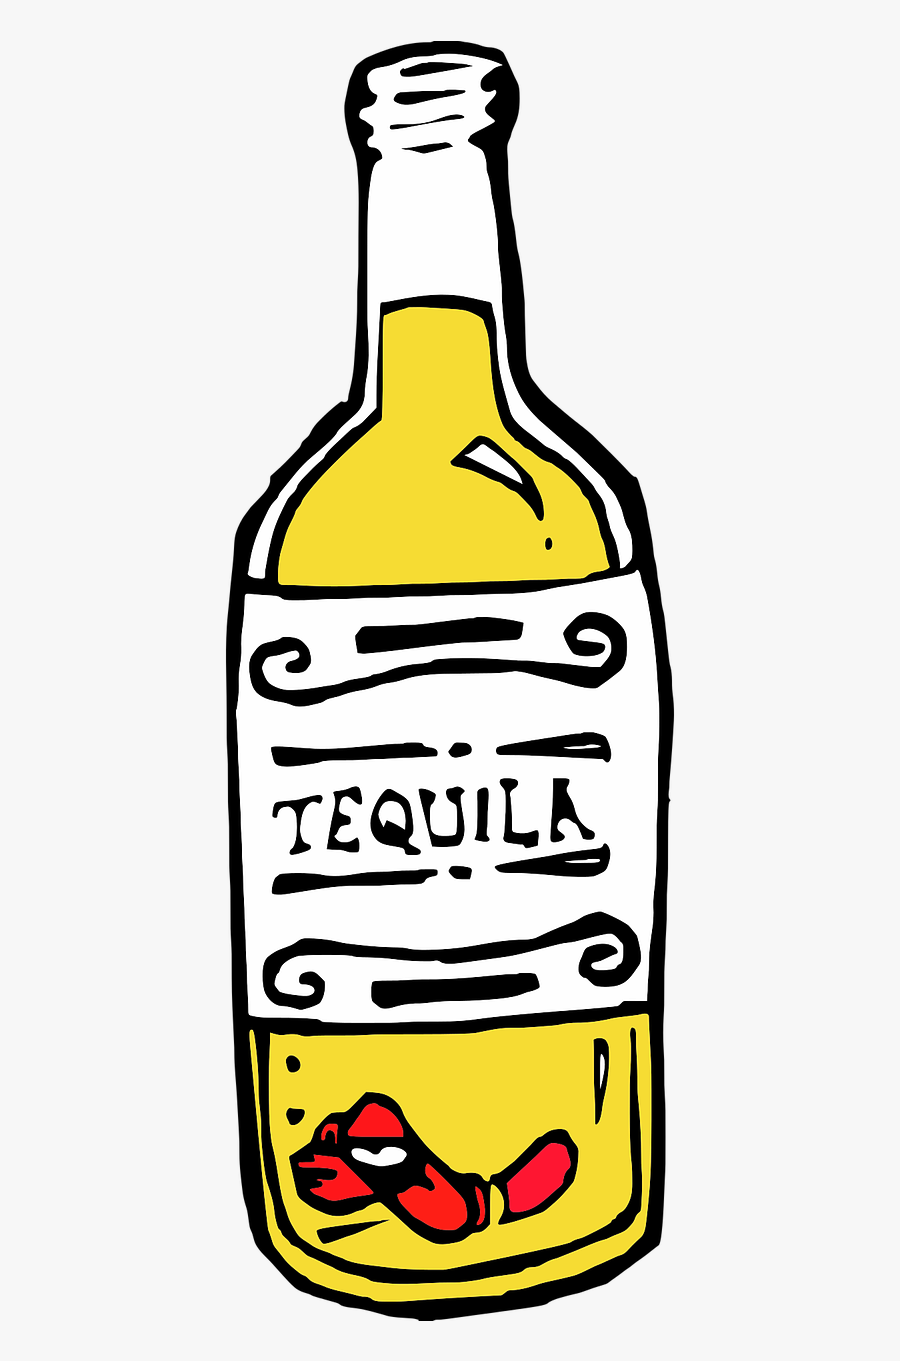 Tequila 1524007 960 - Tequila Png, Transparent Clipart